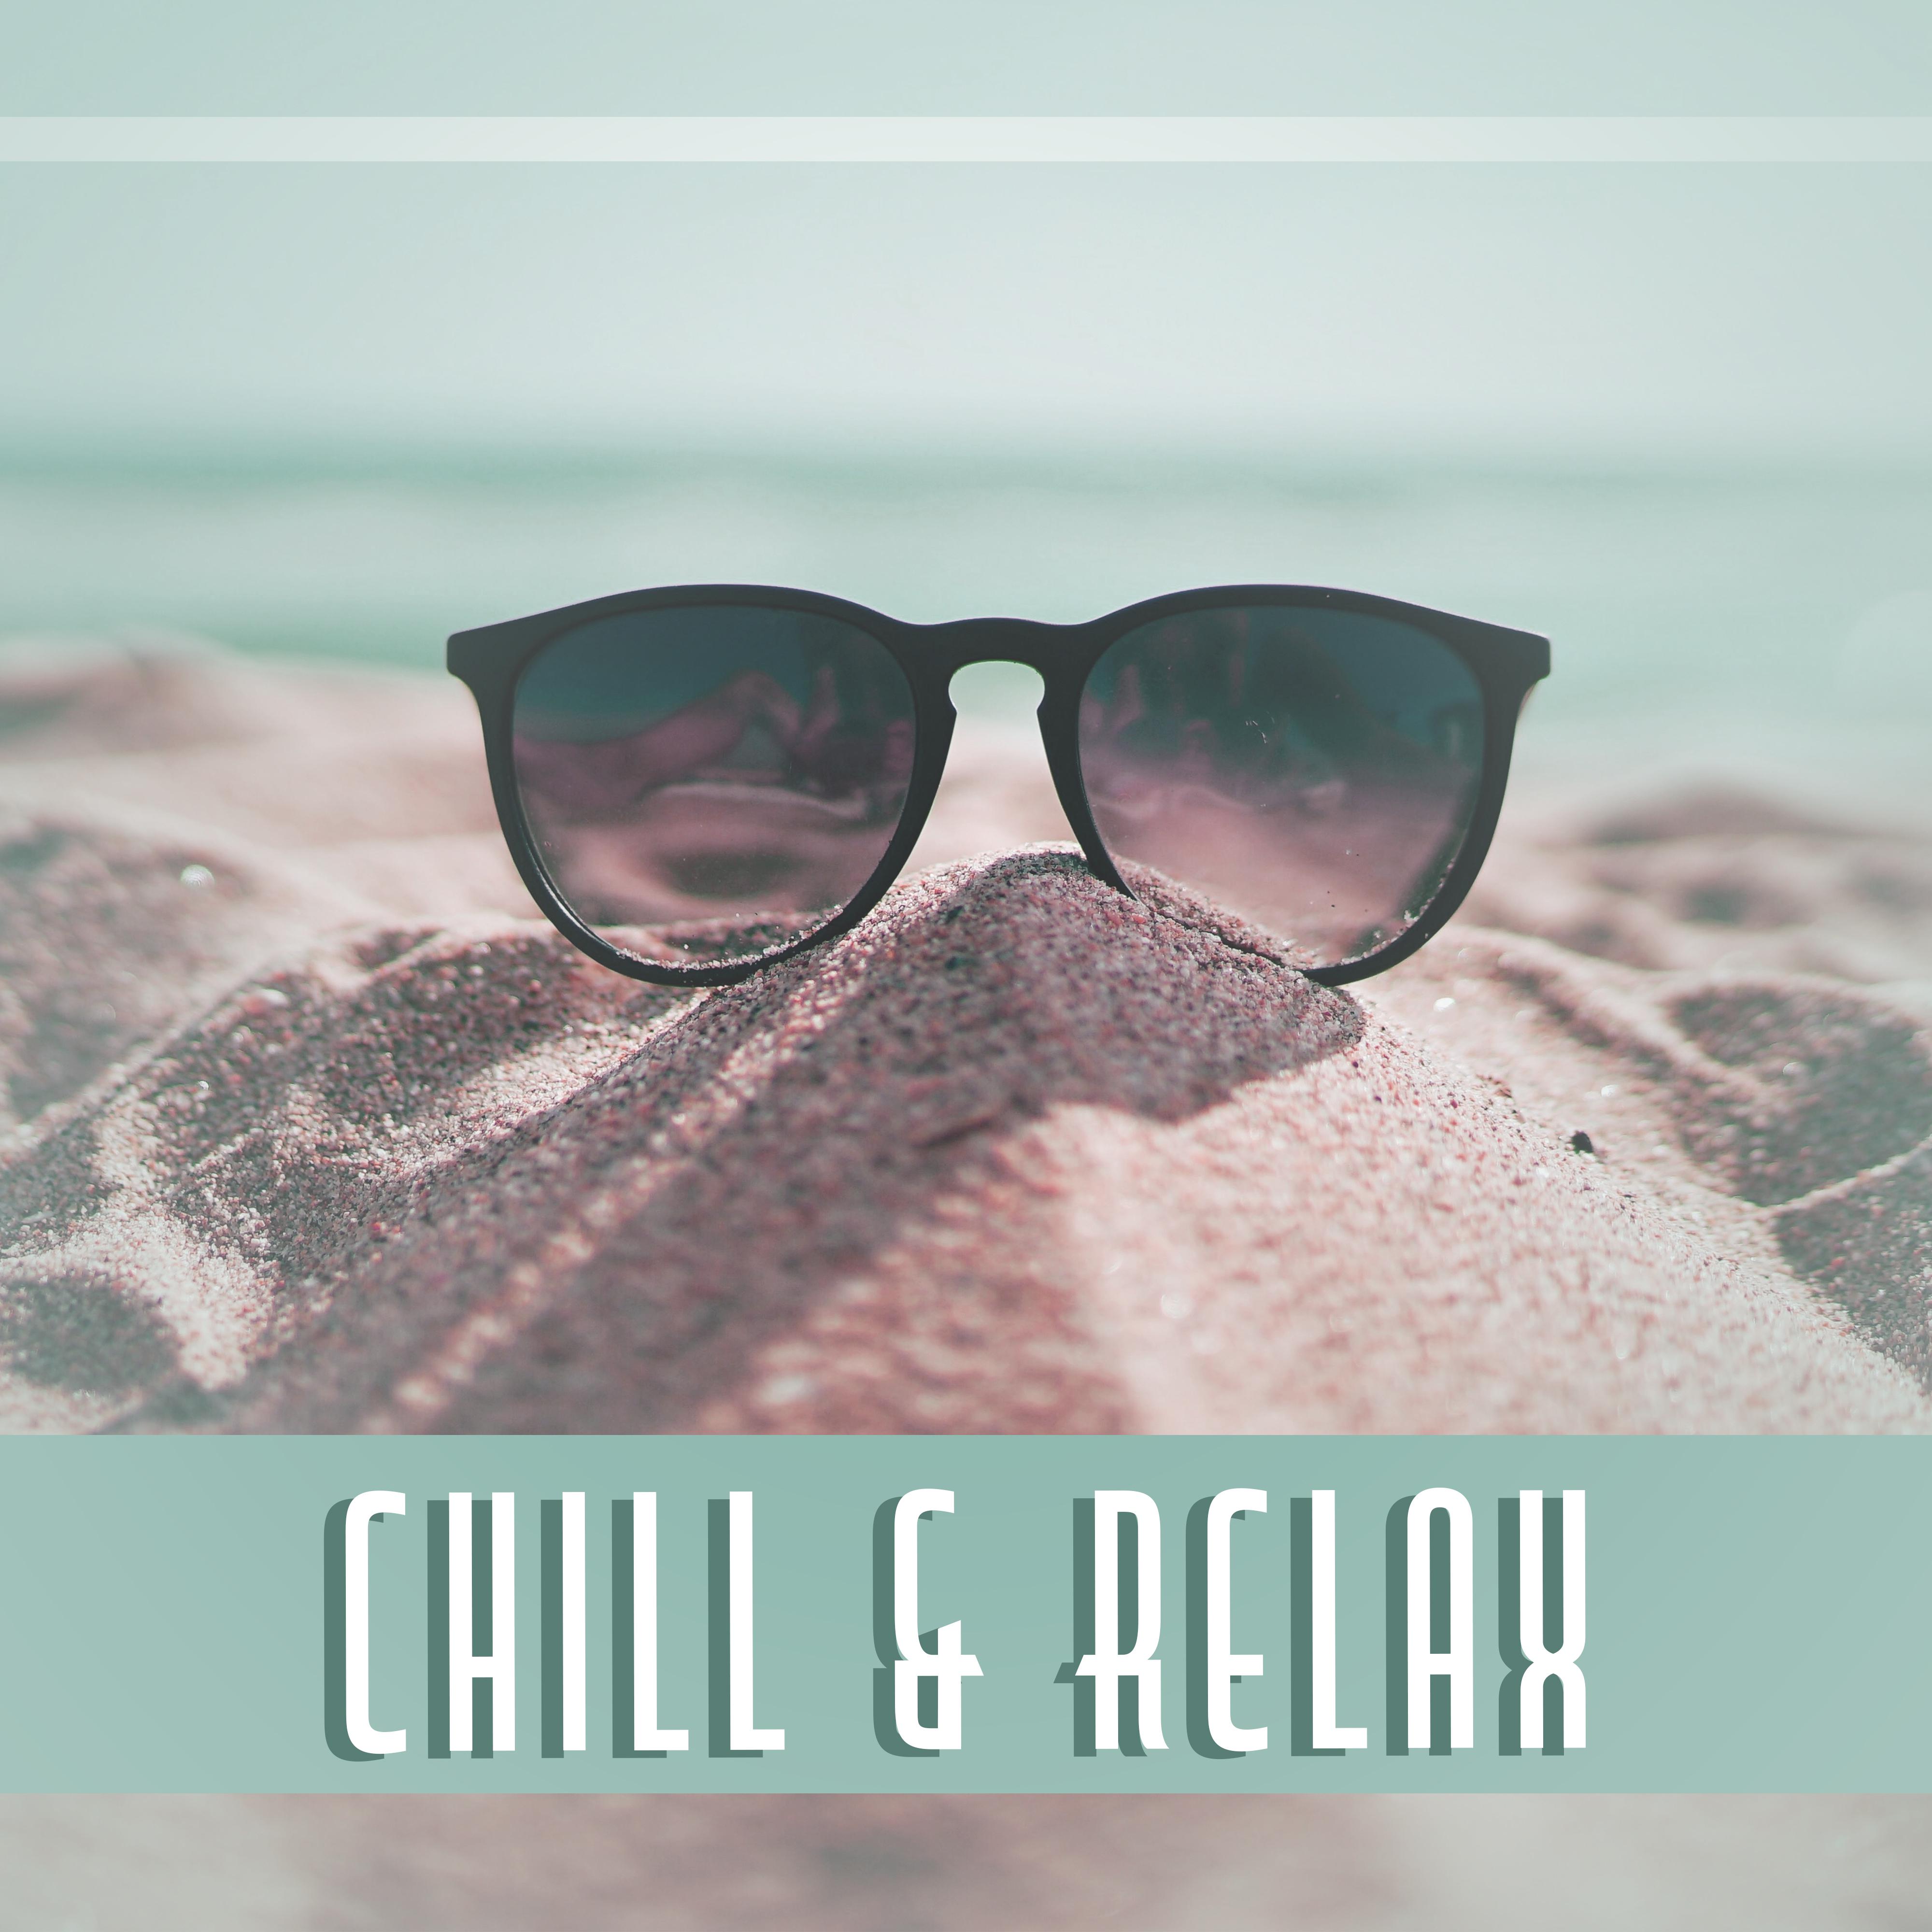 Chill  Relax  Pure Relaxation, Ambient Music, Anti Stress Sounds, Lounge Mix, Peaceful Mind, Best Chill Out Music